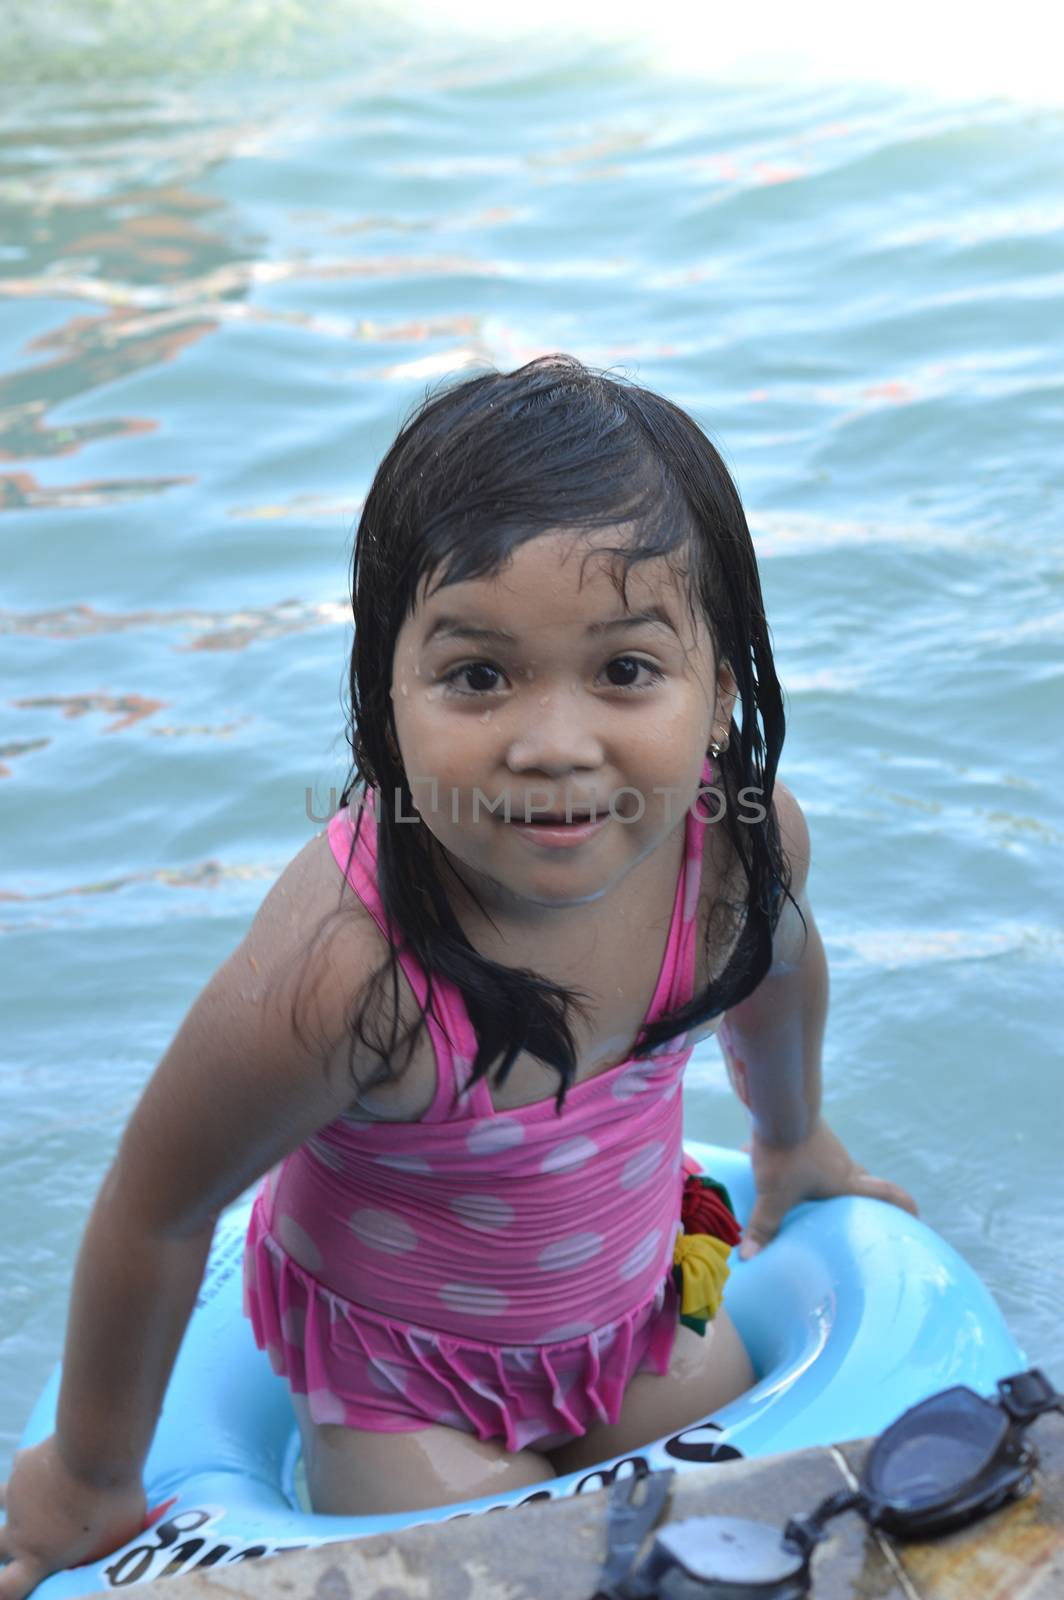 Asian little girl in the pool